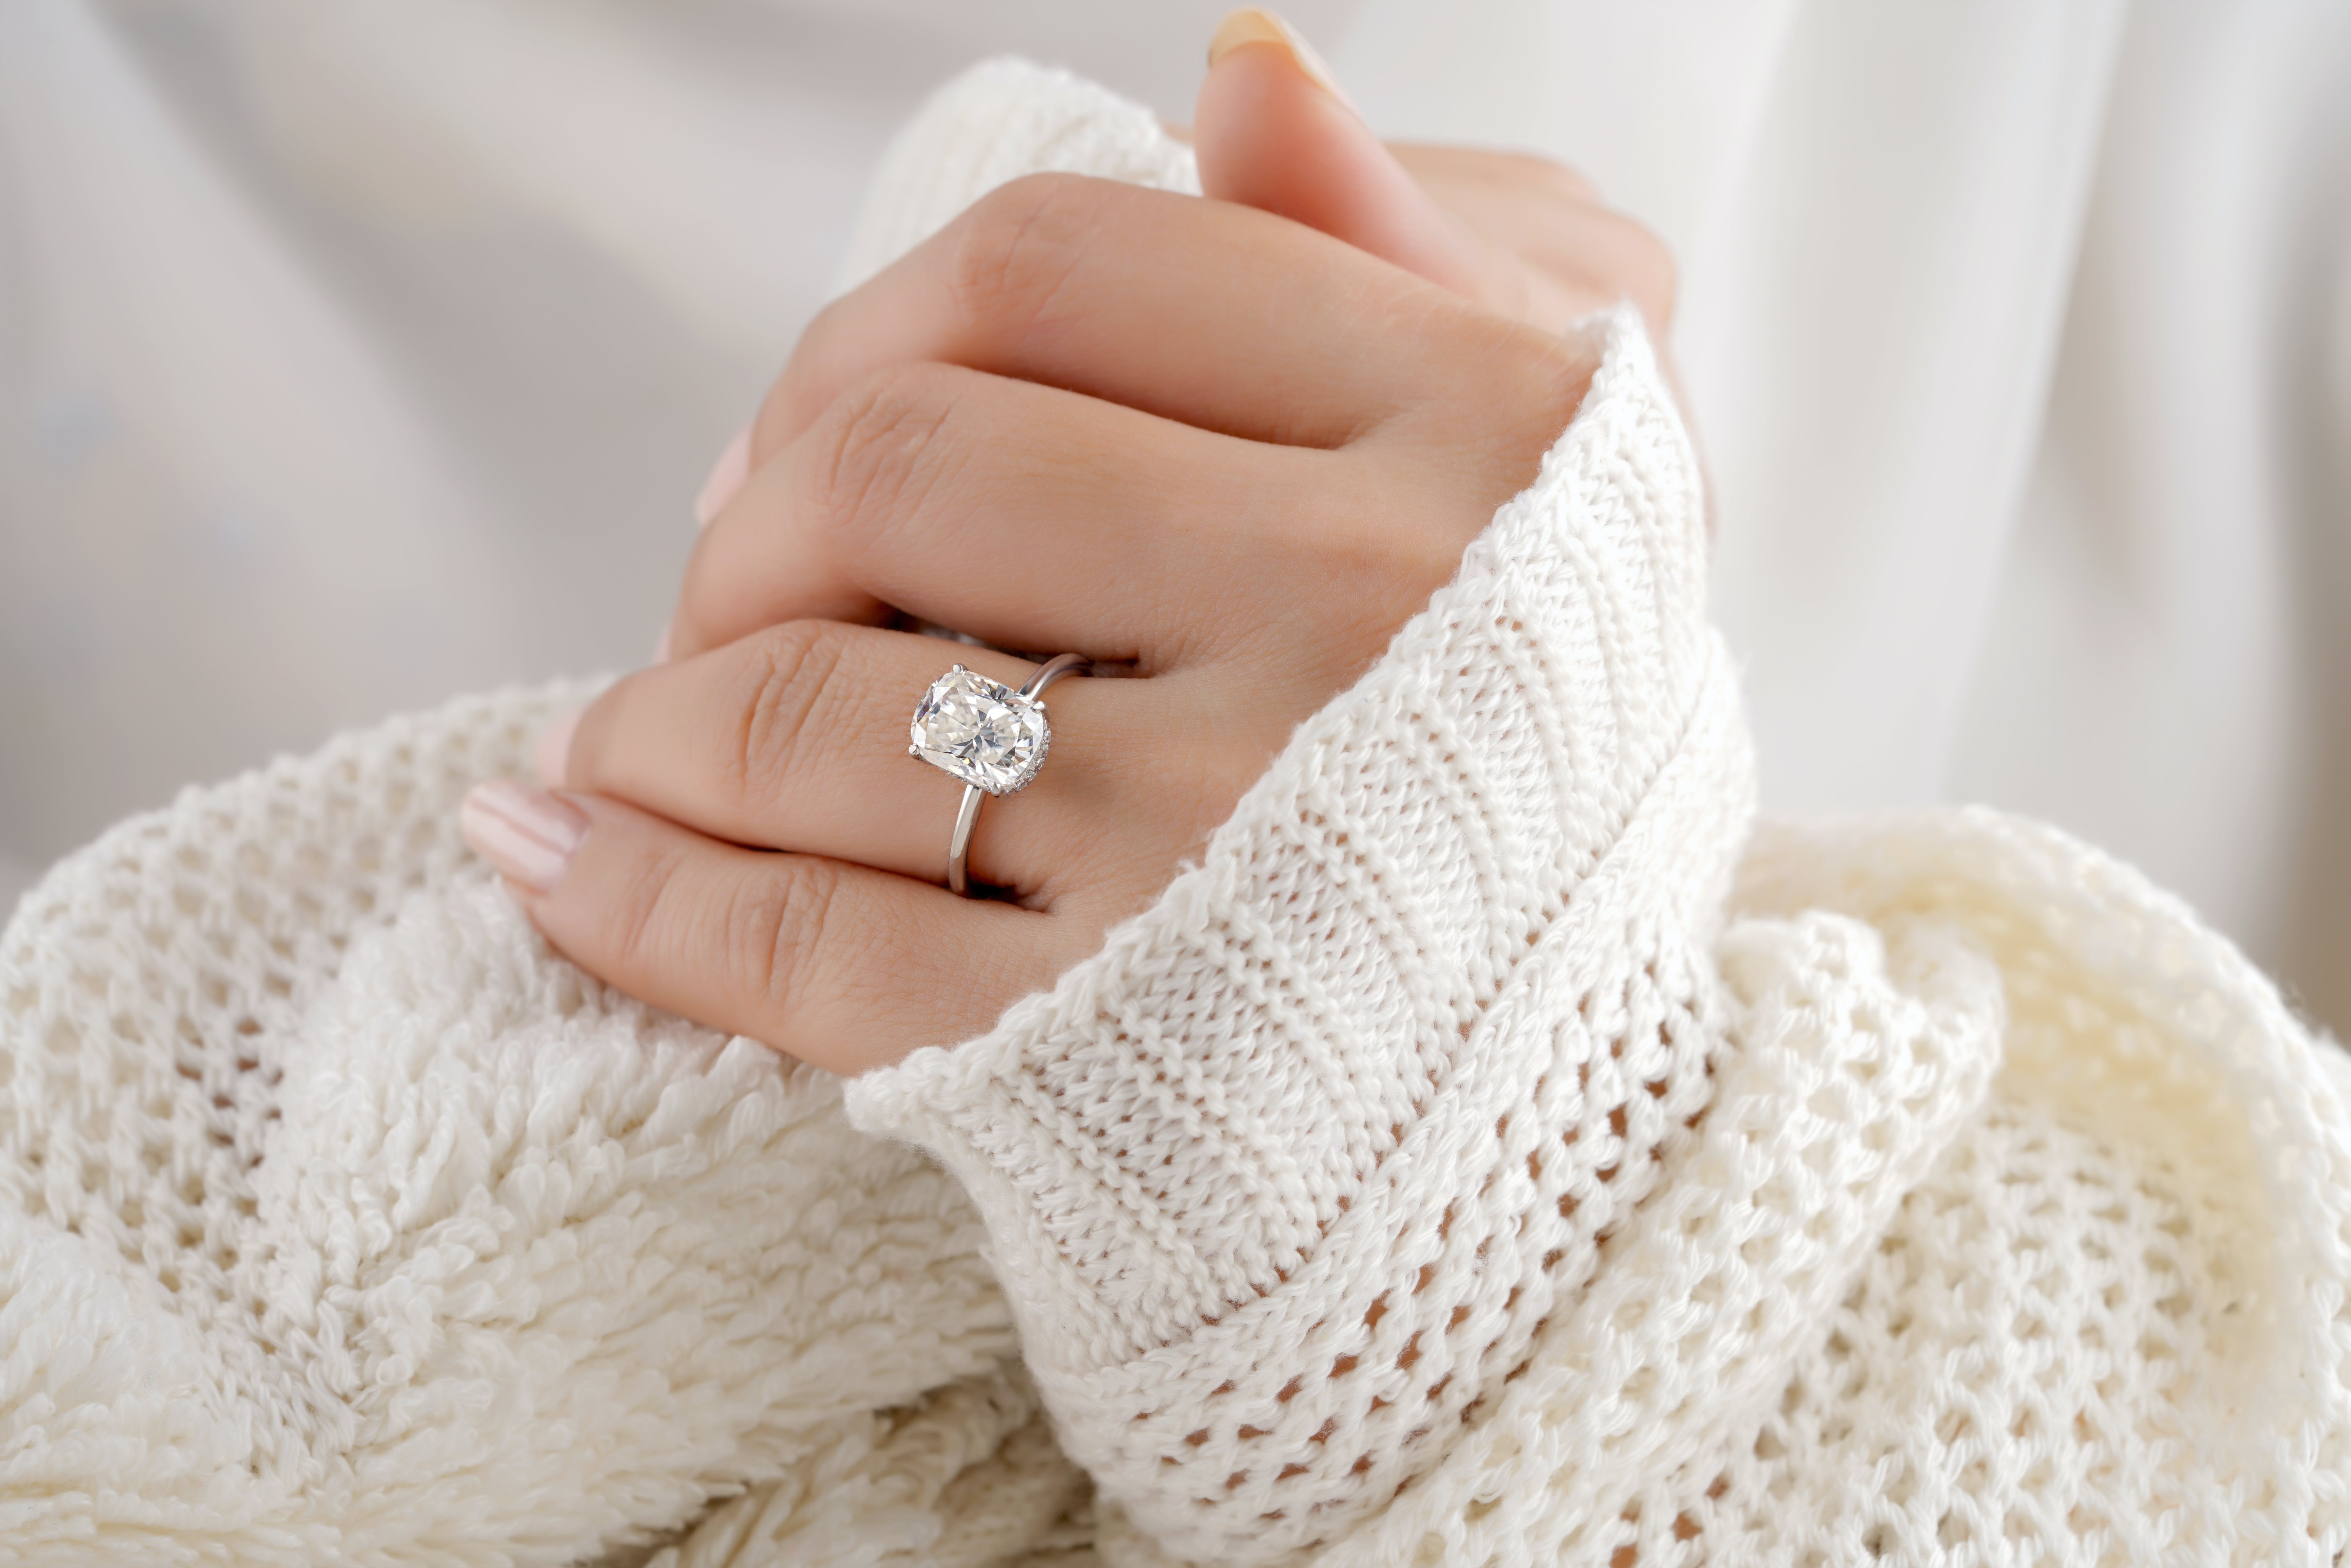 How to Care for Your Fine Jewelry in the Colder Months